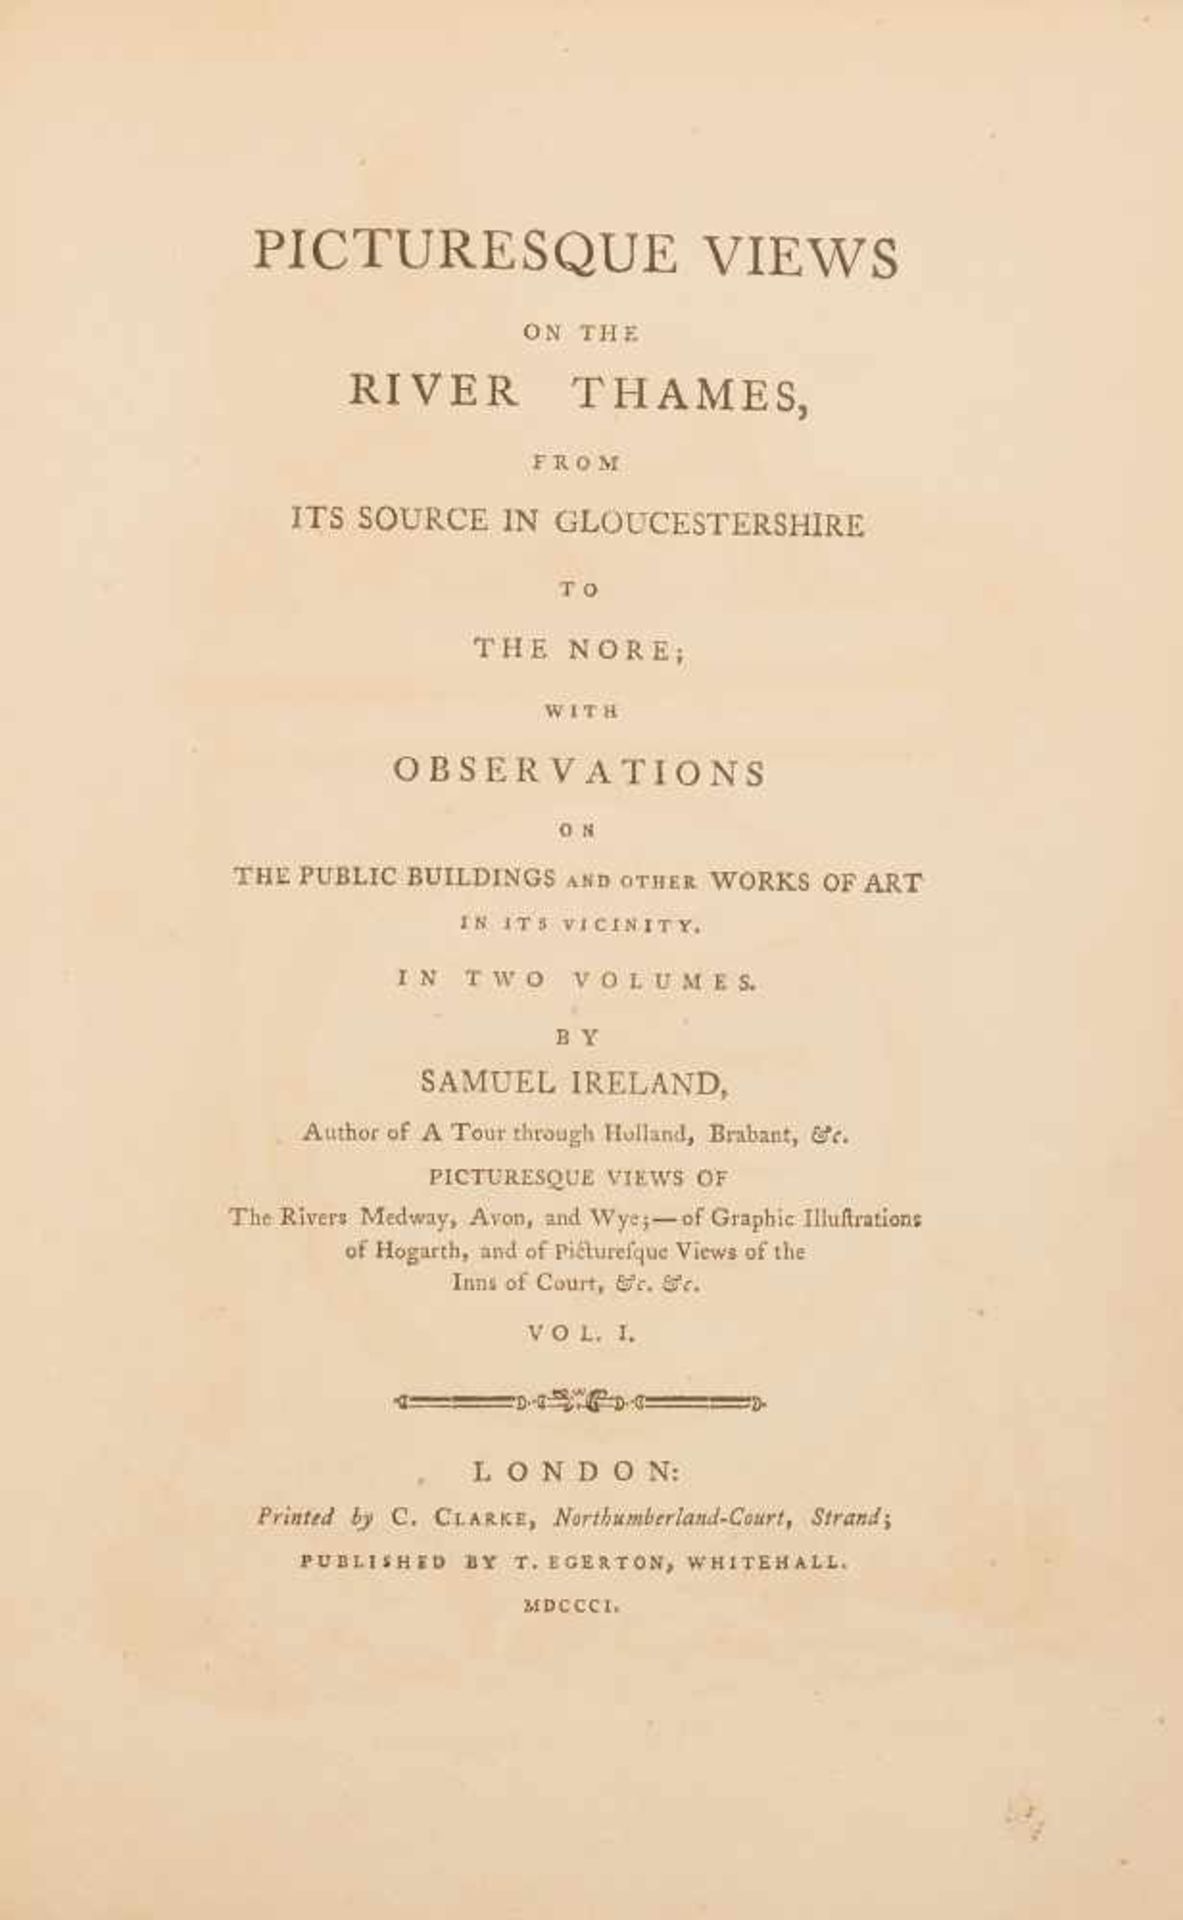 Ireland, SamuelPicturesque views on the river Thames, from its source in Glocestershire to the Nore;